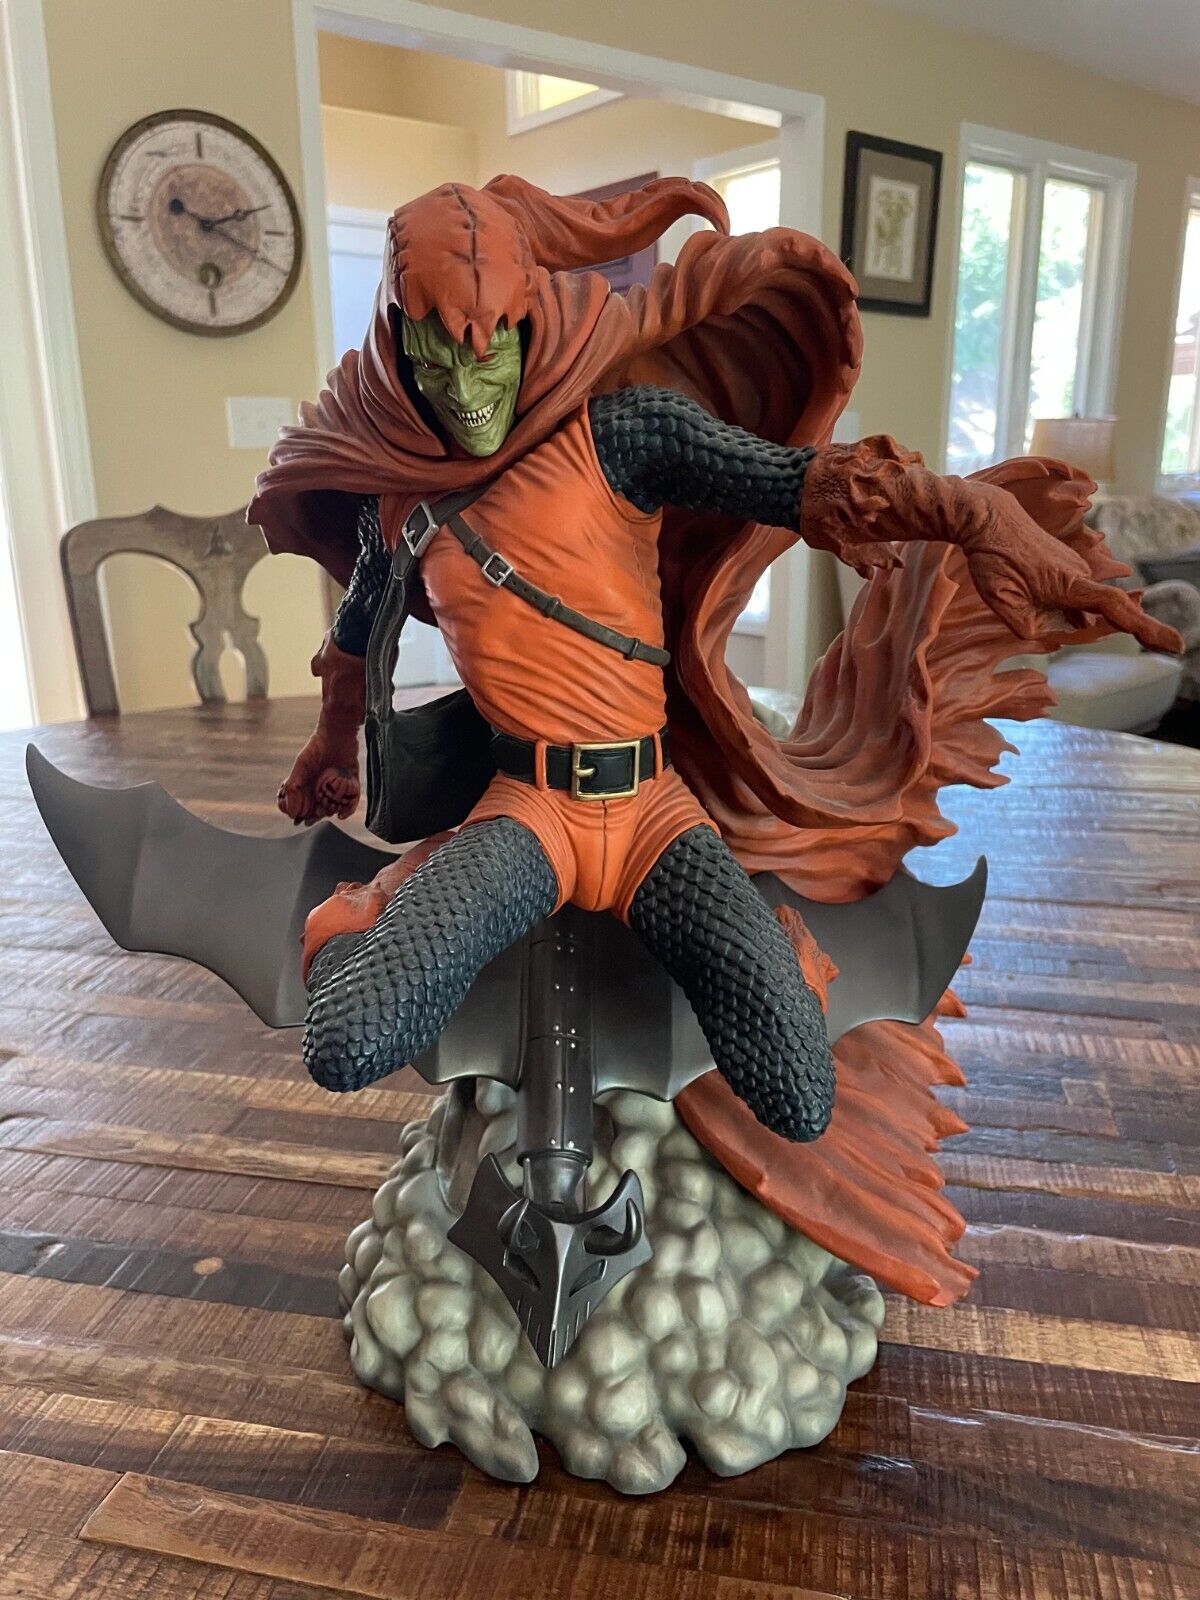 Hobgoblin Comiquette Statue Sideshow Collectibles, very good condition with Box